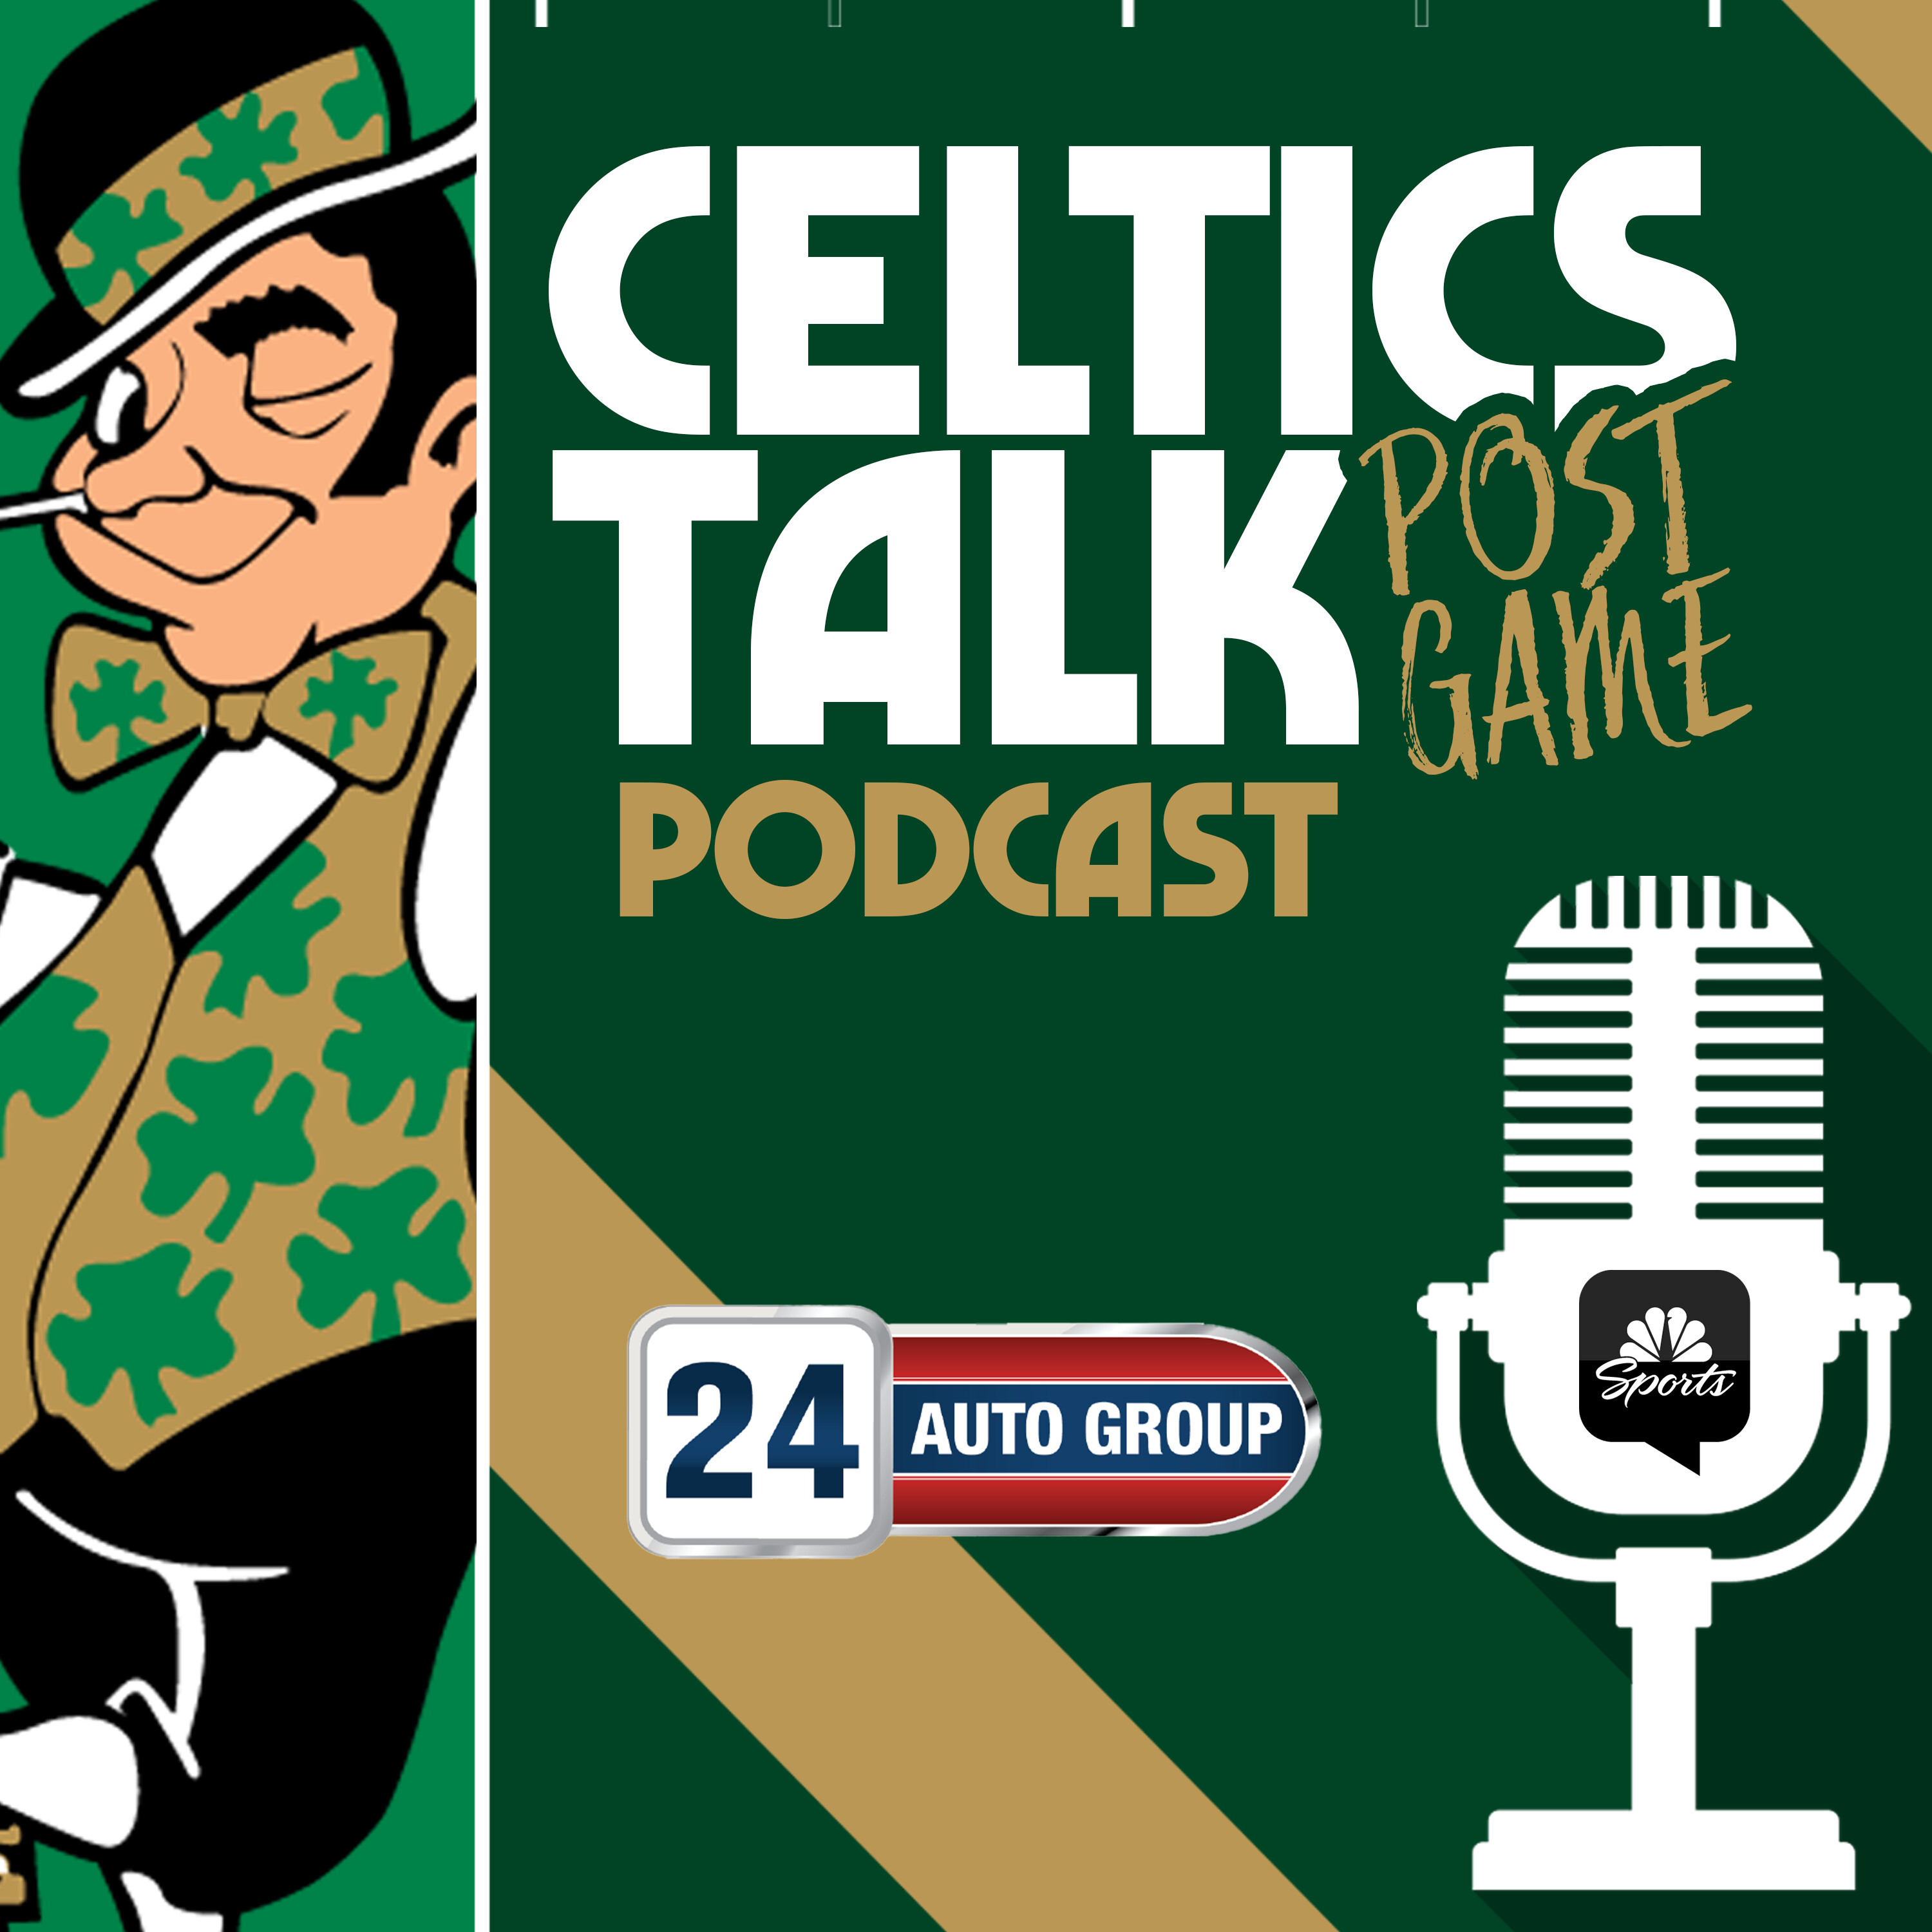 POSTGAME POD: Celtics hold off late run by Bulls in back-and-forth battle